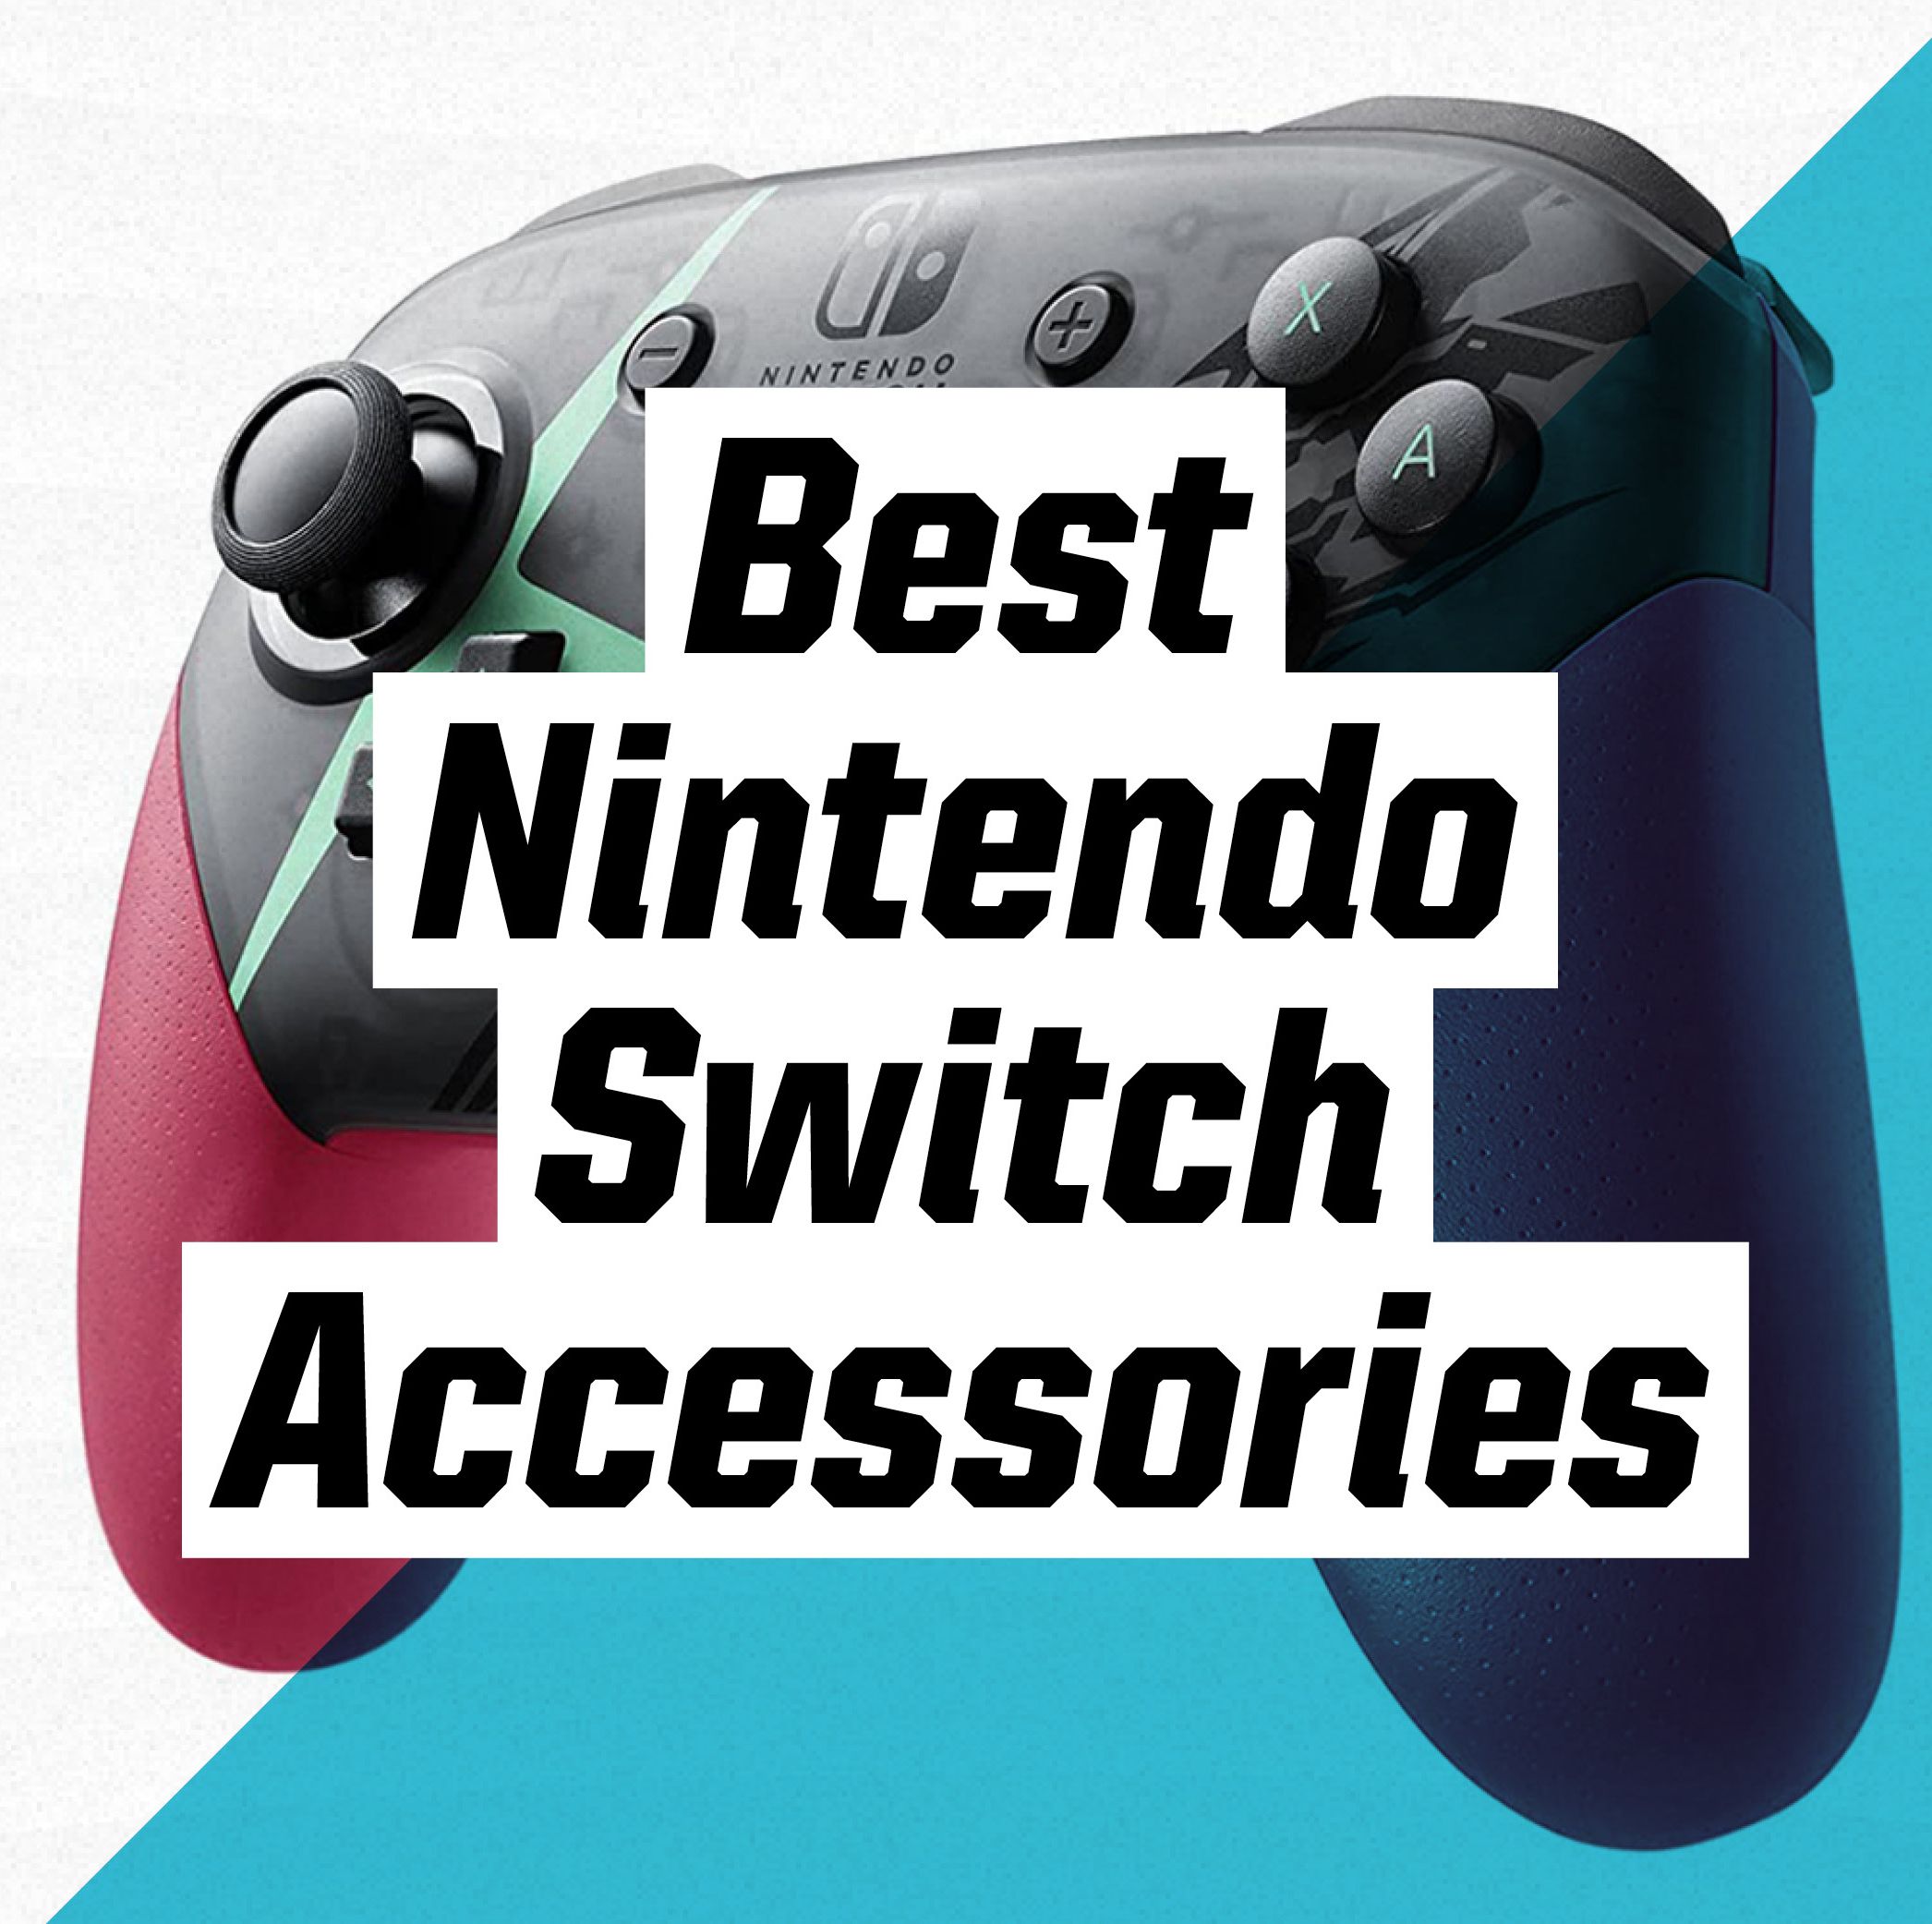 The Best Nintendo Switch Accessories to Maximize Your Fun